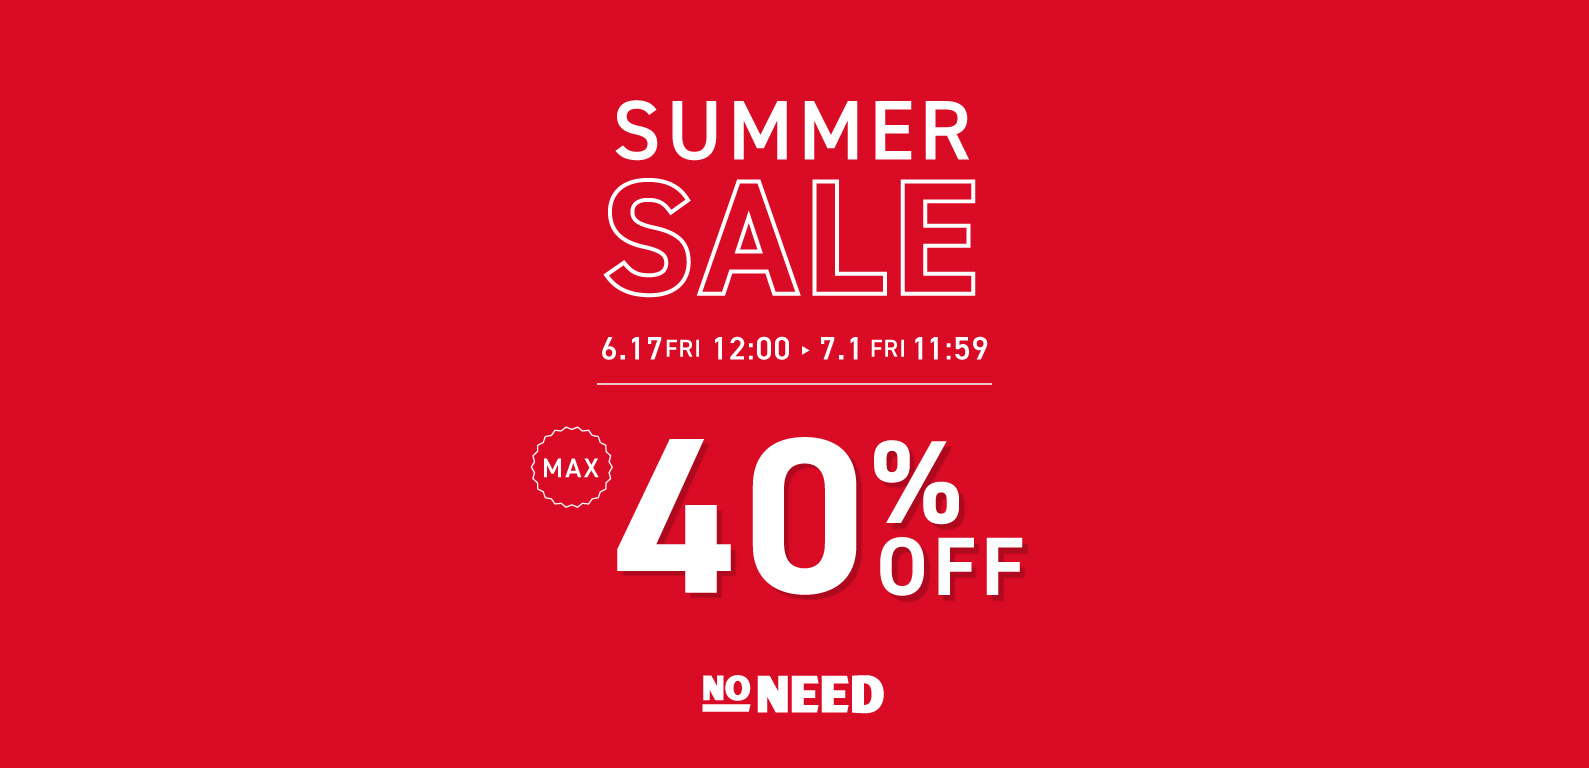 NONEED | SUMMER SALE